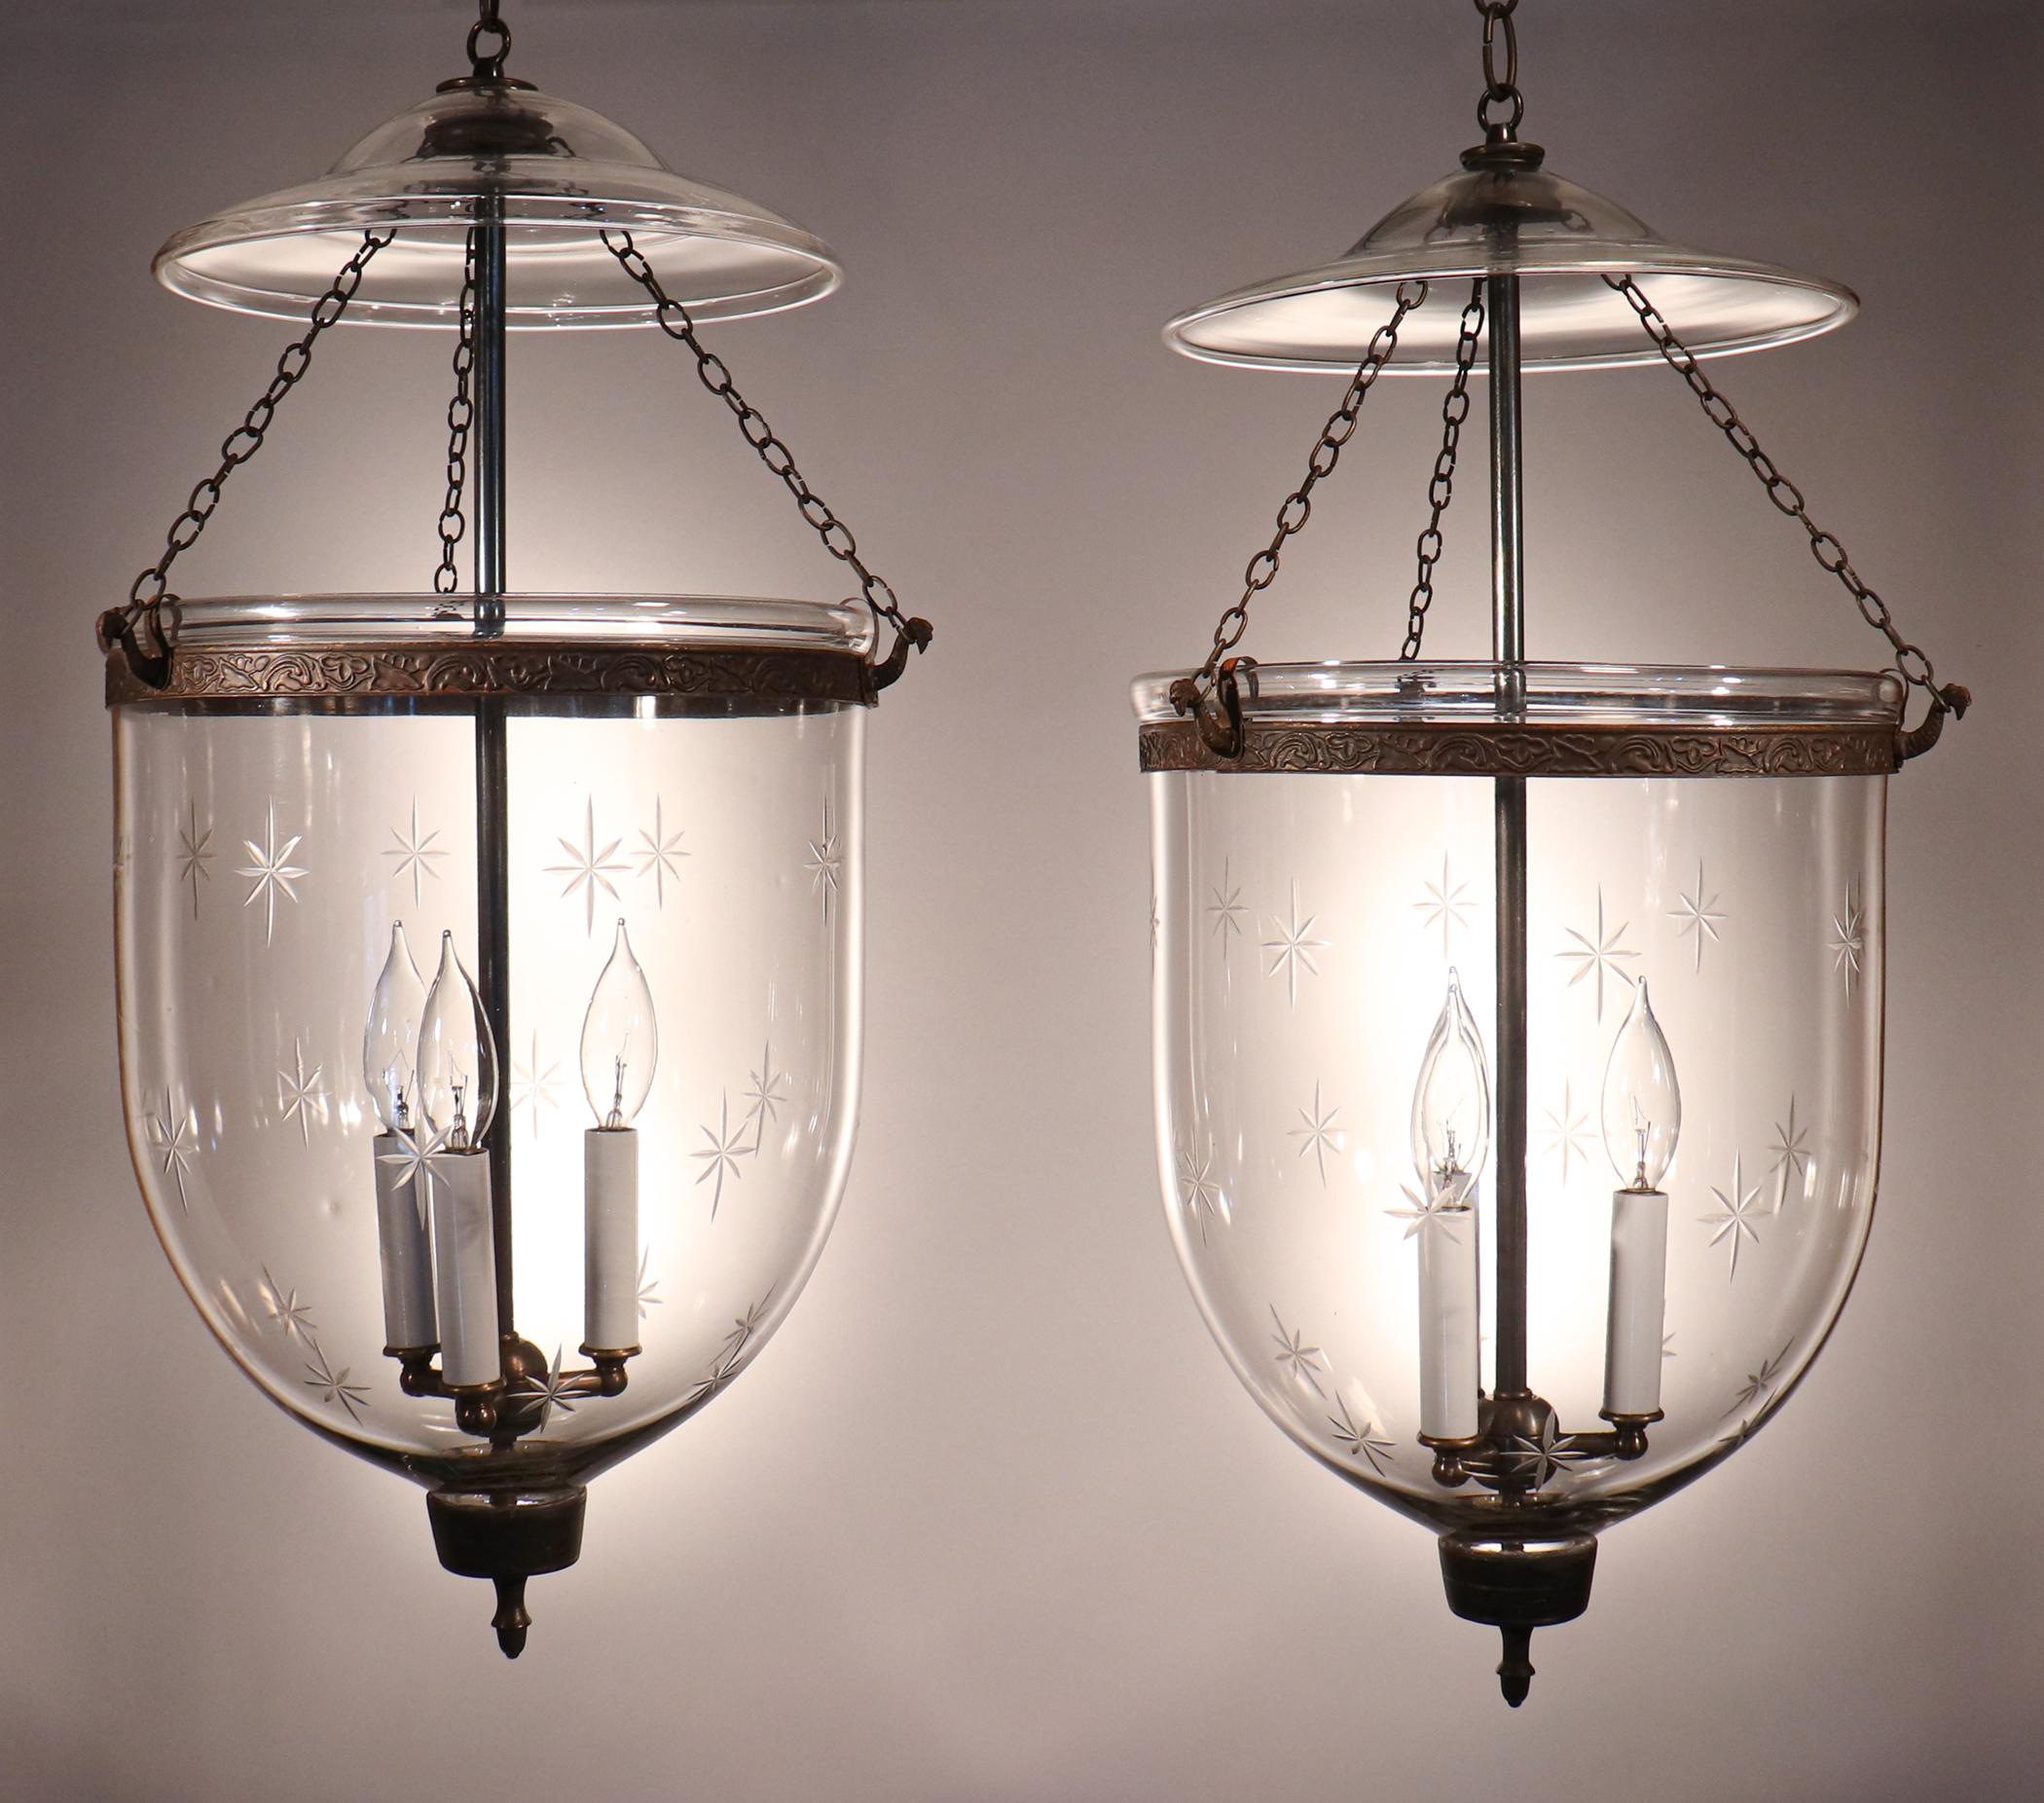 An exquisite pair of antique English bell jar lanterns with an etched star motif, circa 1880. These well-matched lanterns are of very good quality, with desirable swirls and air bubbles in the hand blown glass. They have been newly electrified with